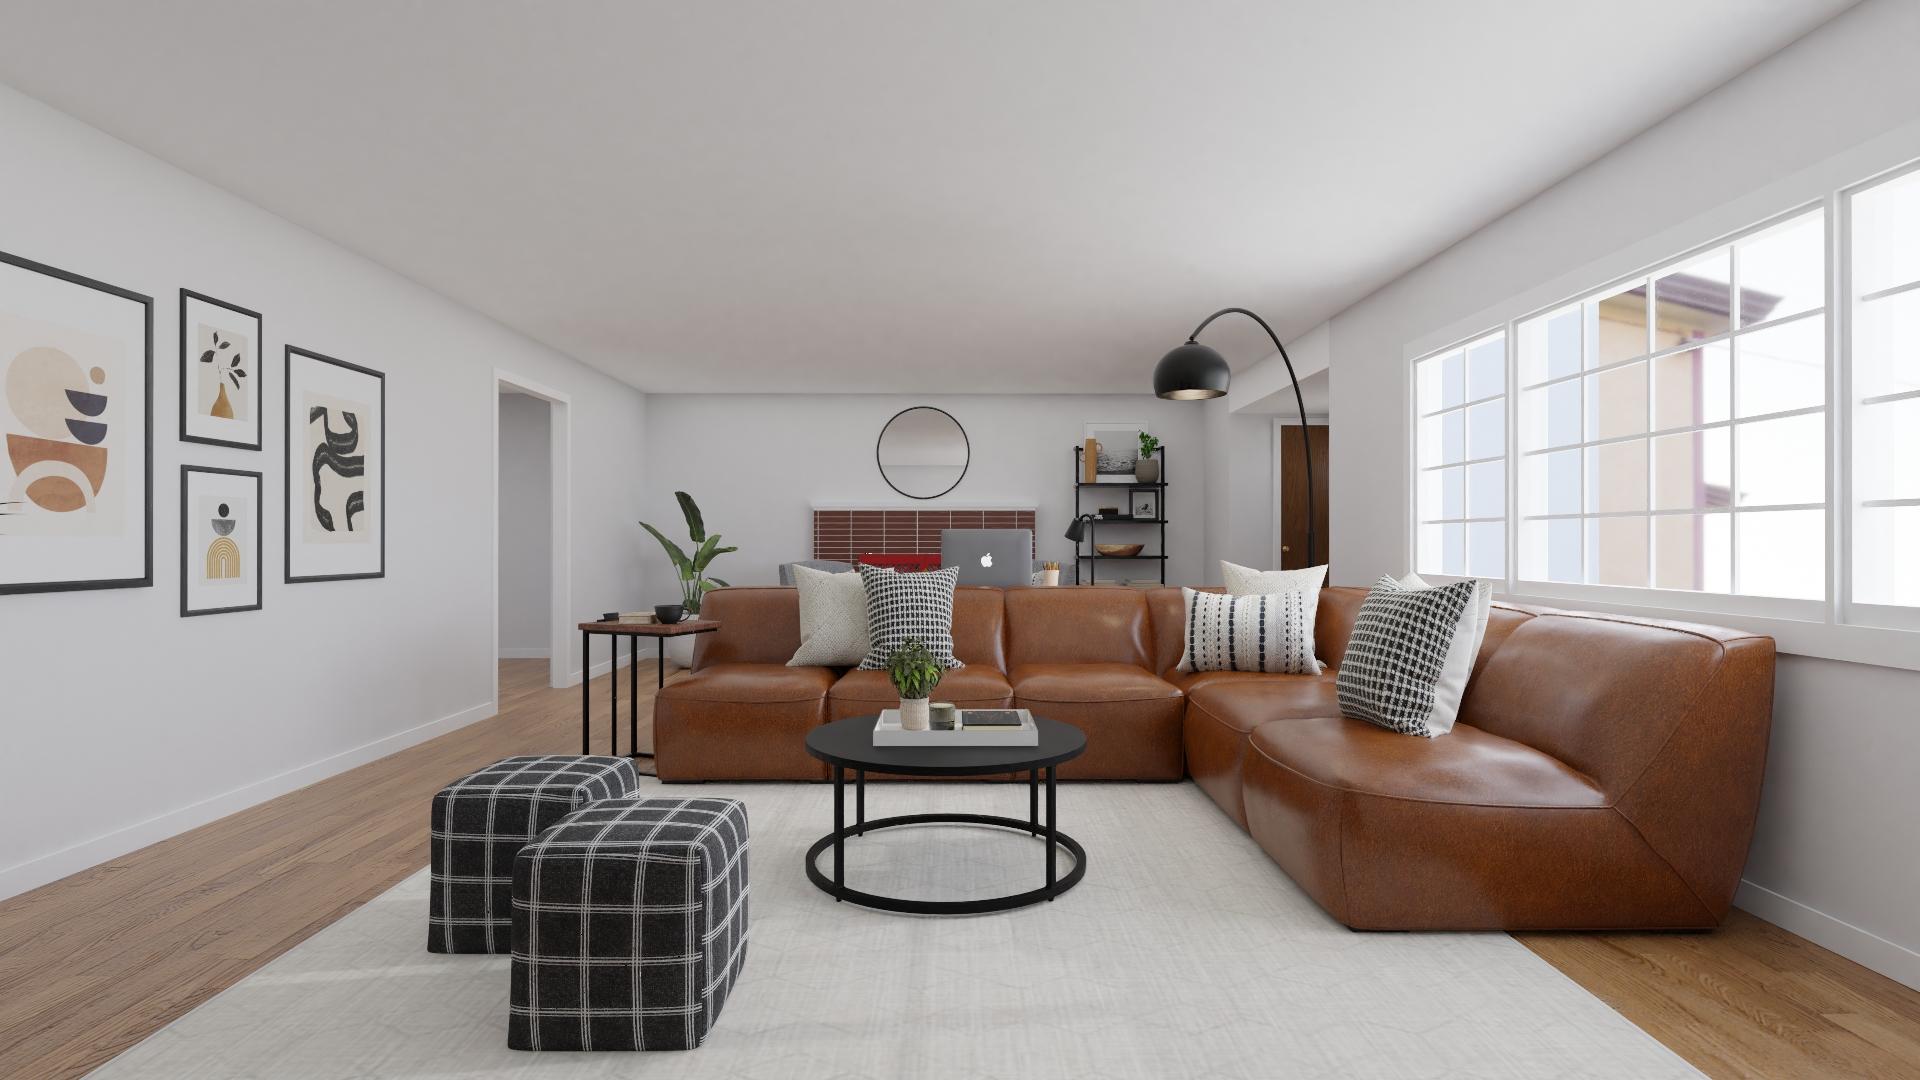 A Playful Industrial Living Room